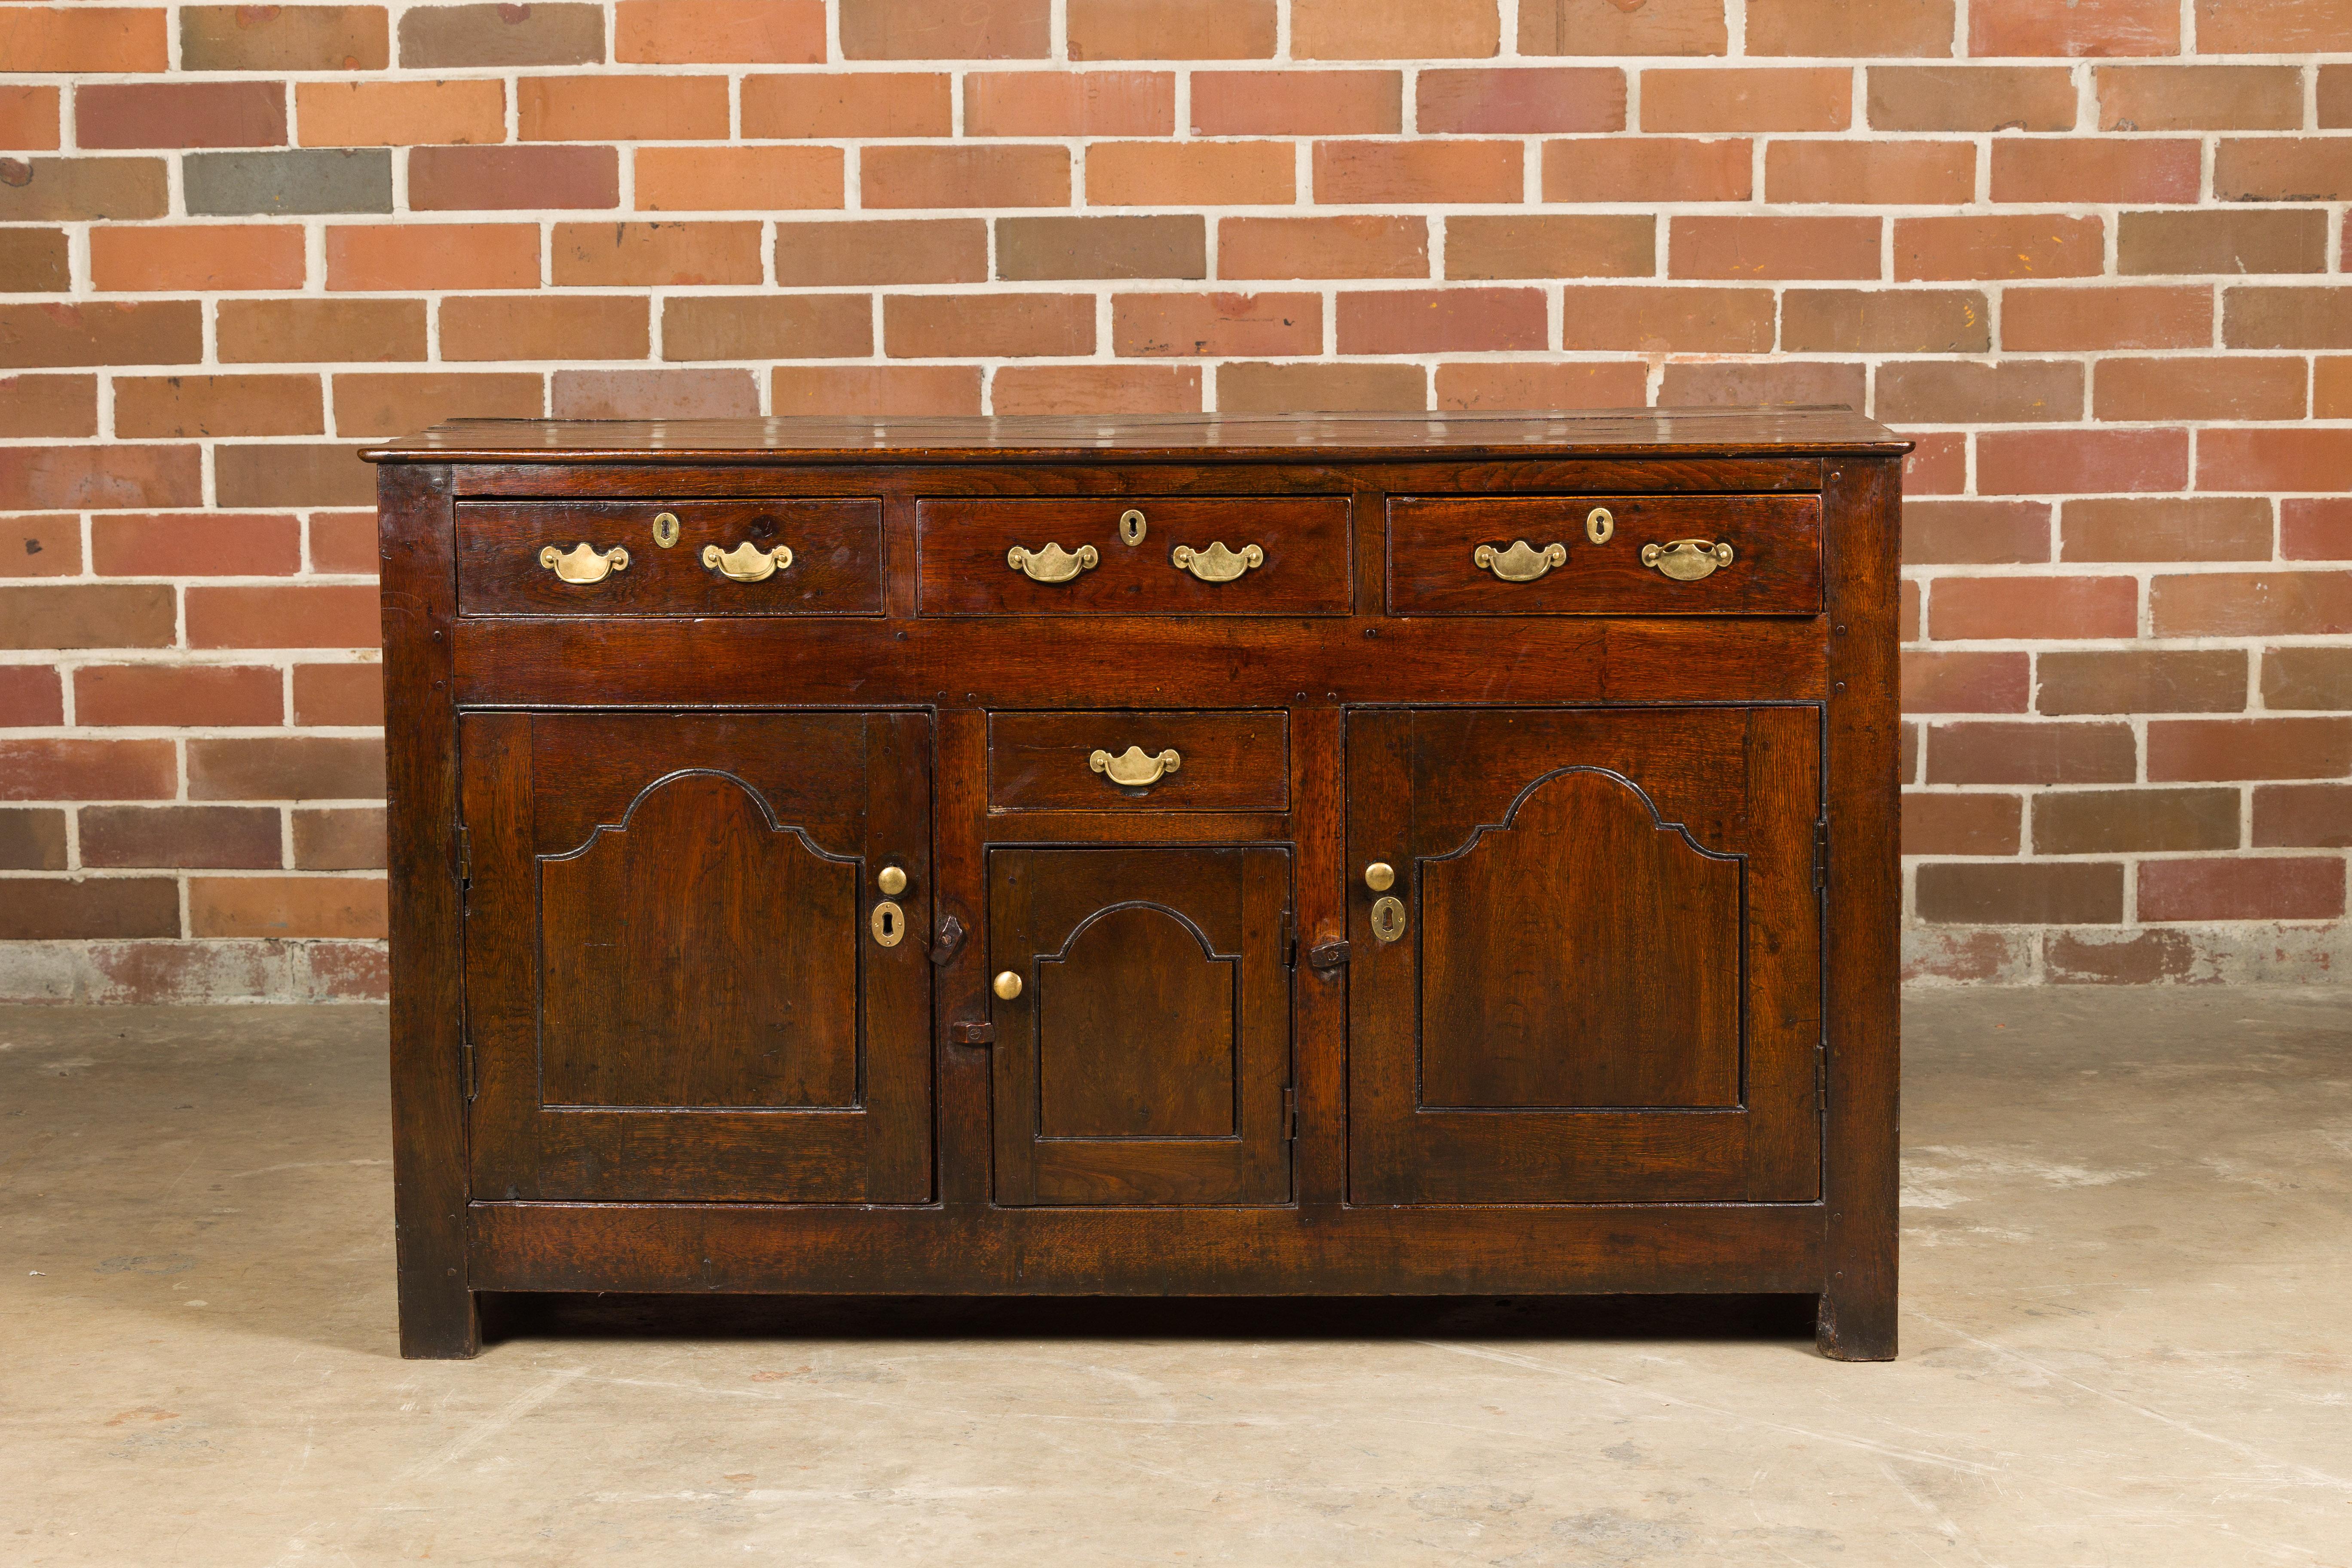 An English oak buffet from the 19th century with four drawers, three doors and brass Chippendale style hardware. Immersing us in the rich allure of the 19th century, this English oak buffet stands as a testament to classic craftsmanship. The piece